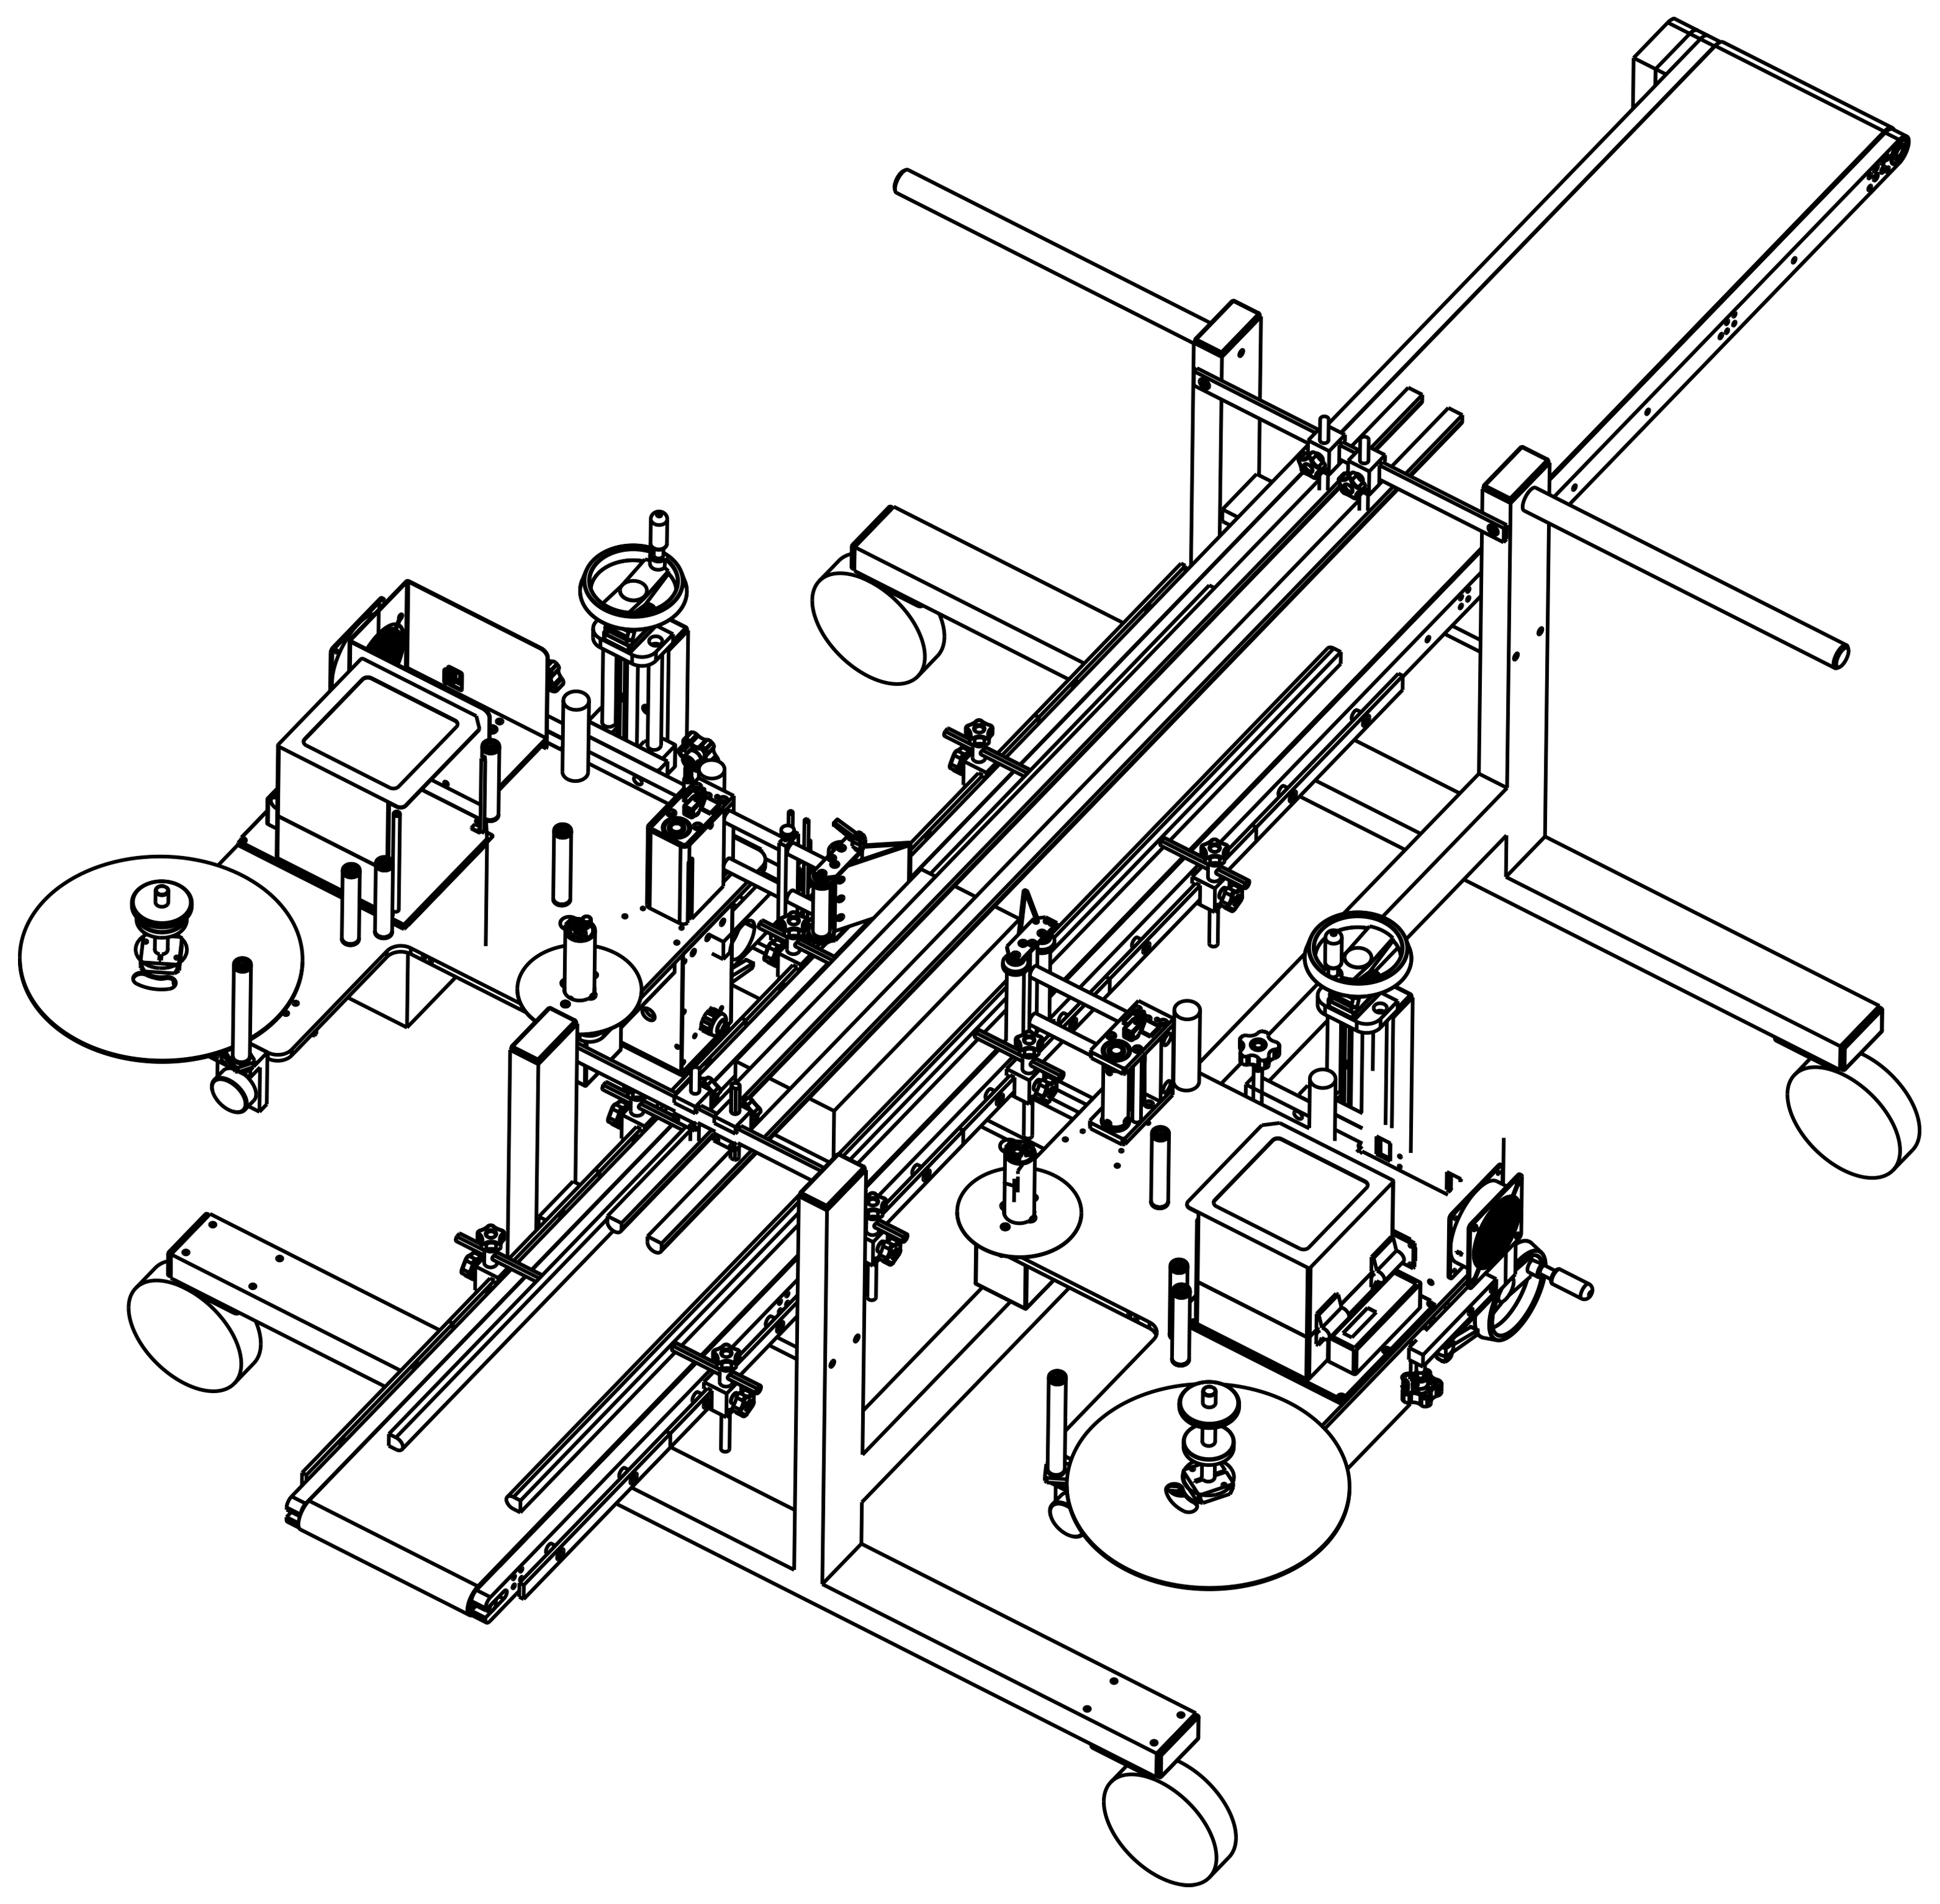 Line drawing of automated horticulture machinery